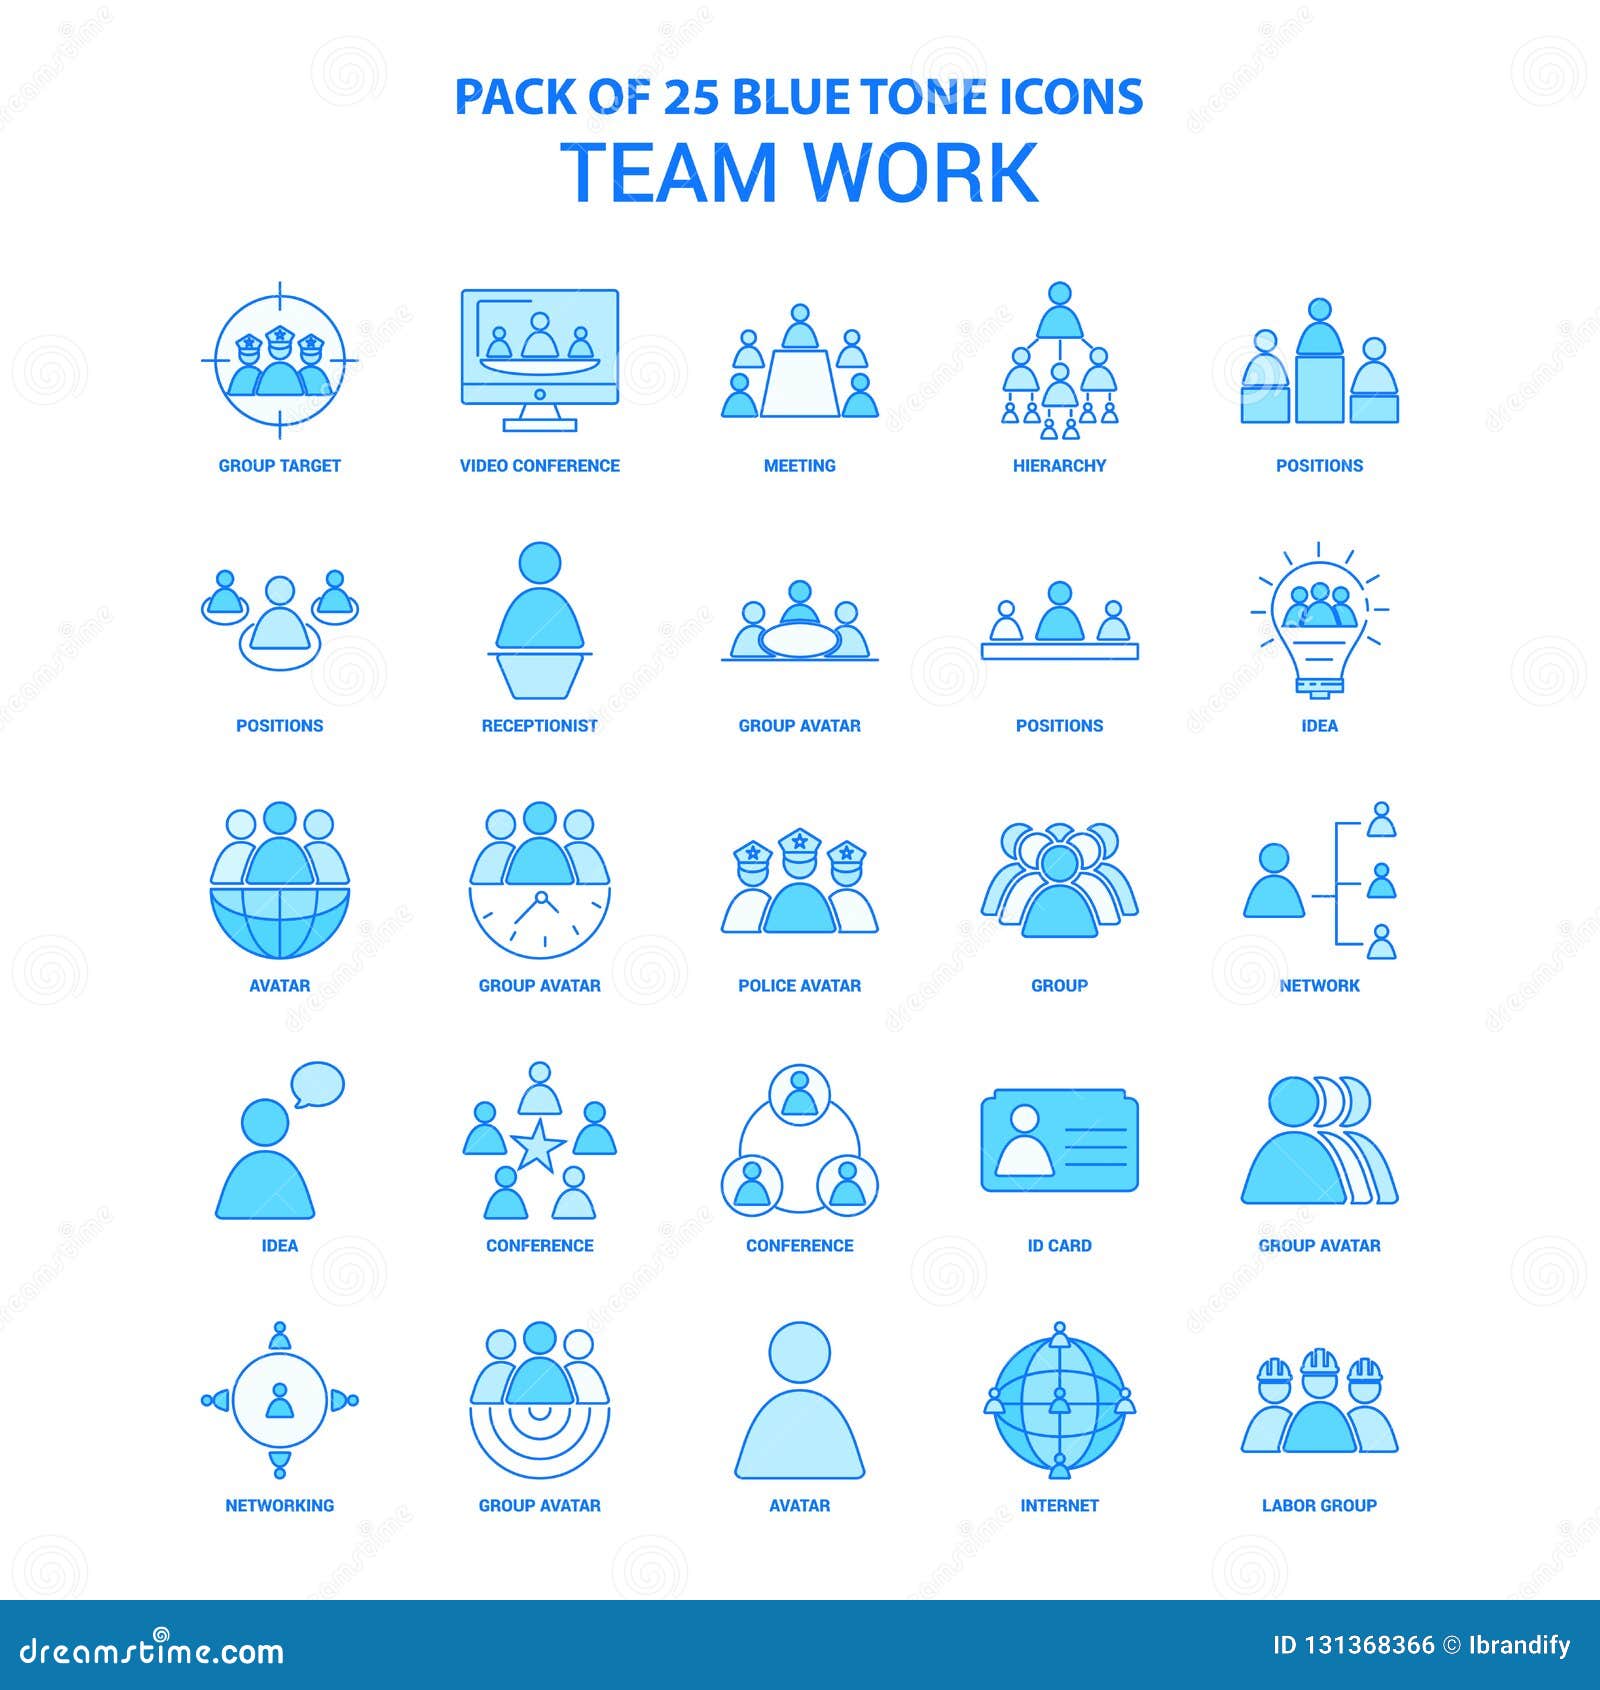 team work blue tone icon pack - 25 icon sets